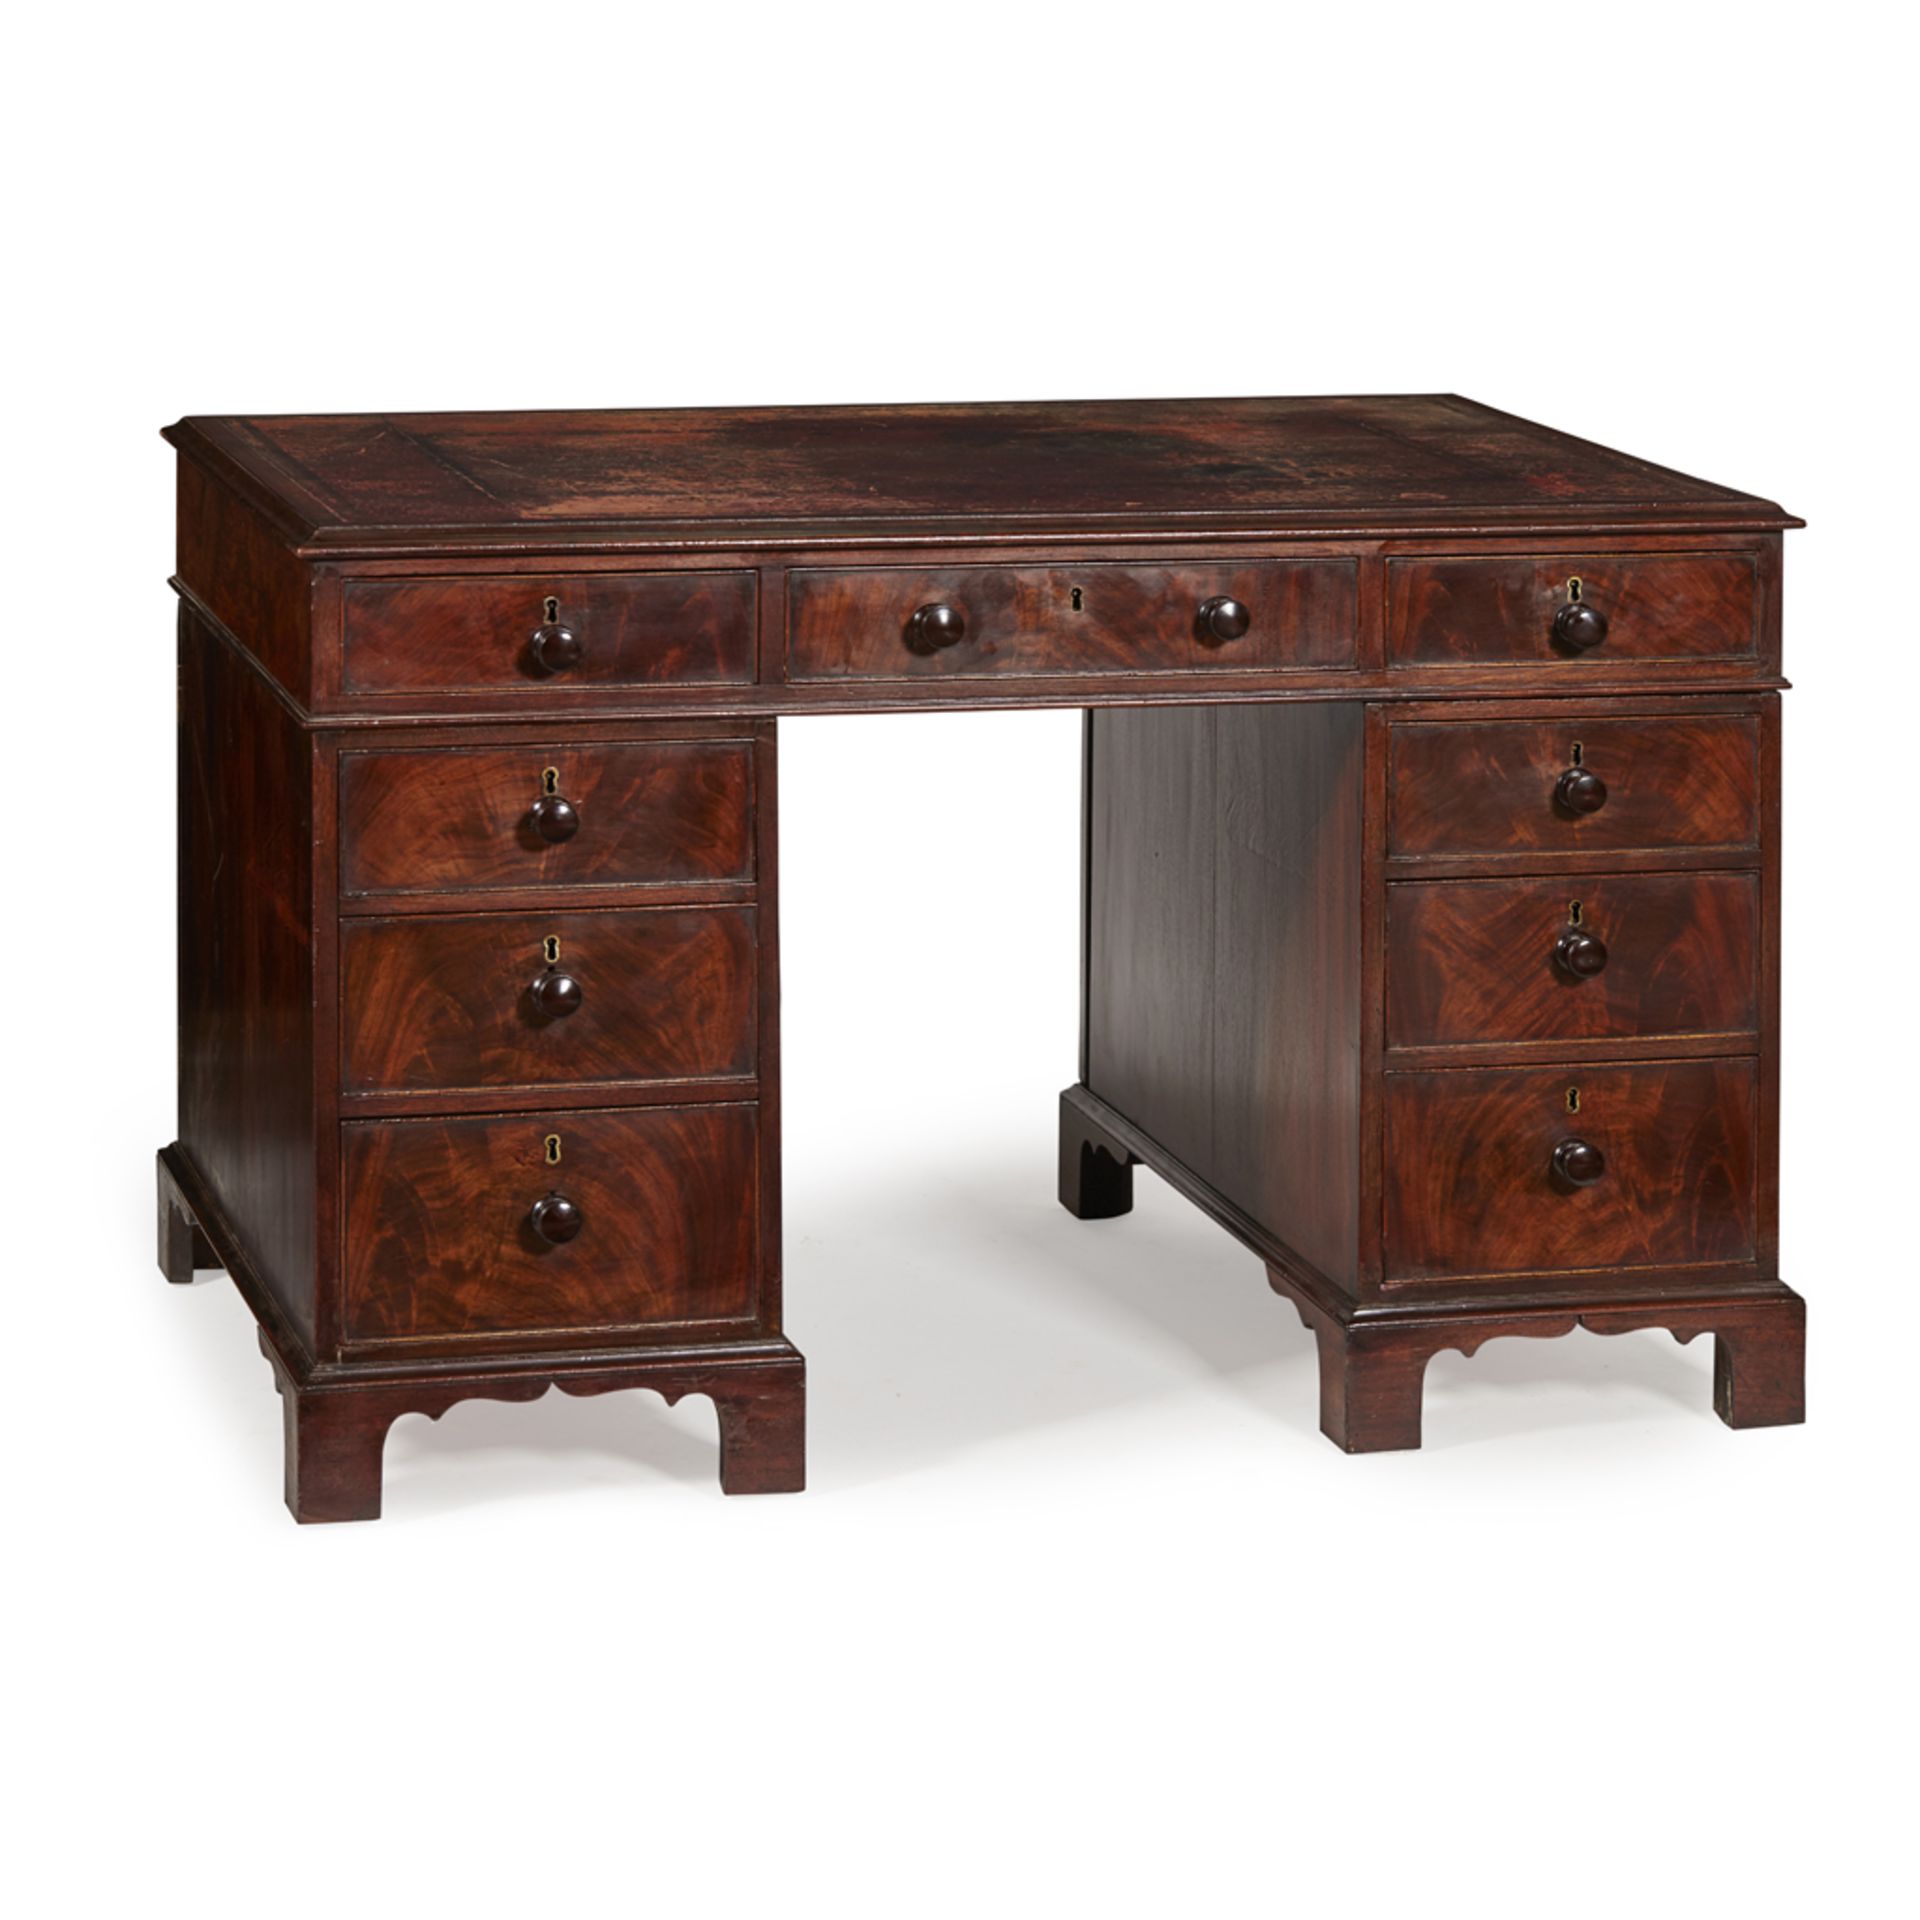 GEORGE III MAHOGANY PEDESTAL DESK LATE 18TH CENTURY the top with a moulded edge and red tooled